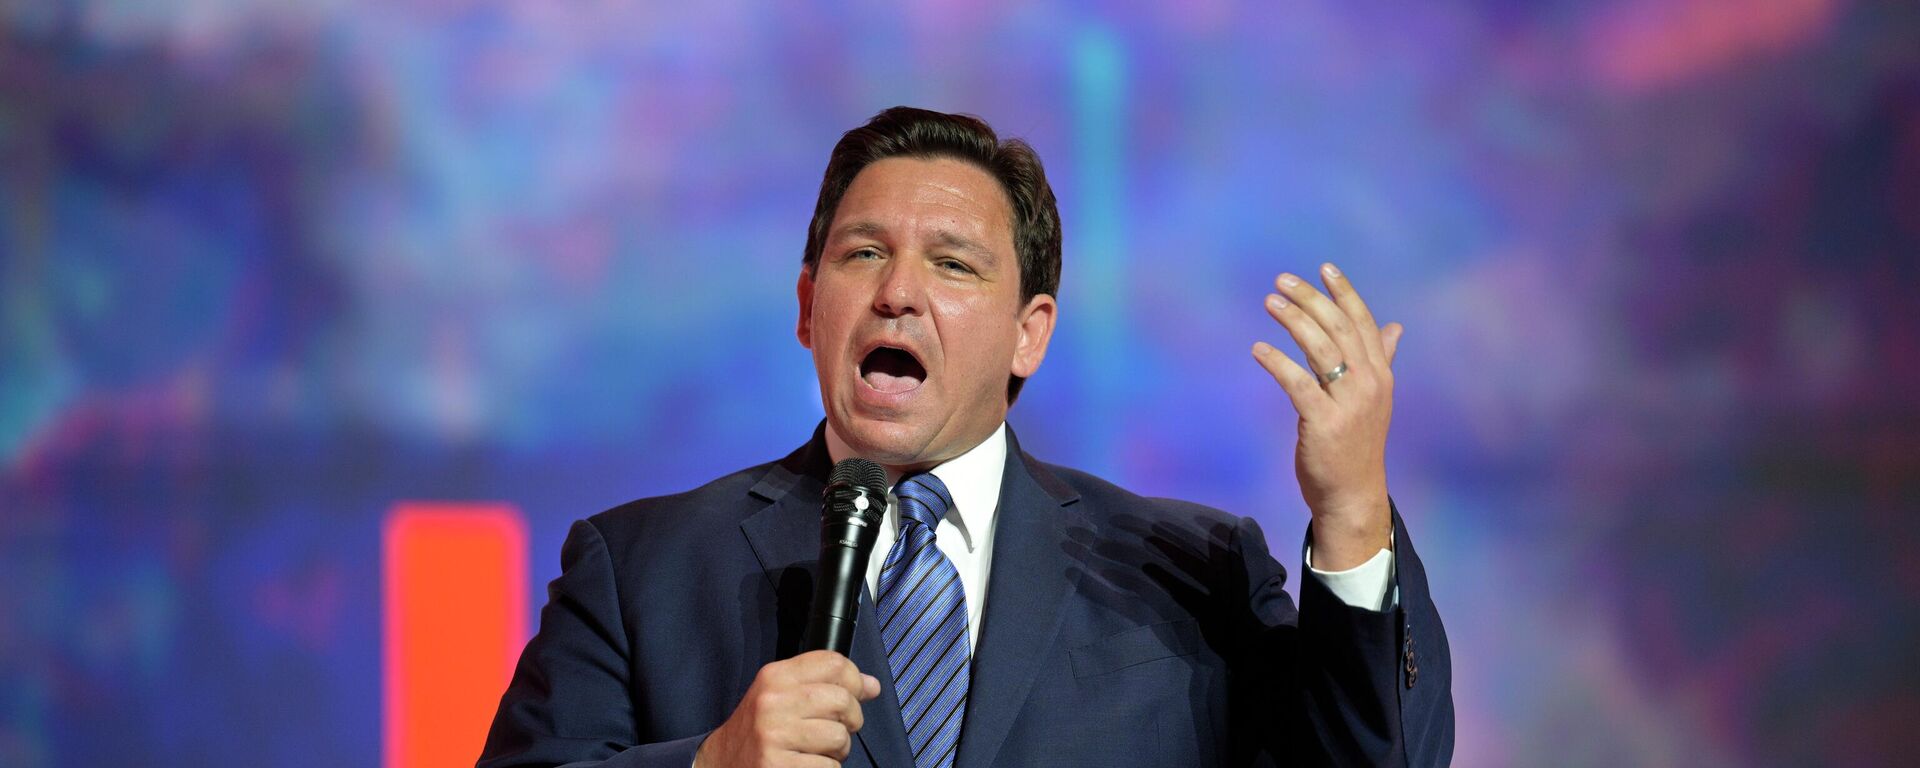 FILE - Florida Gov. Ron DeSantis addresses attendees during the Turning Point USA Student Action Summit, Friday, July 22, 2022, in Tampa, Fla. - Sputnik International, 1920, 25.05.2023